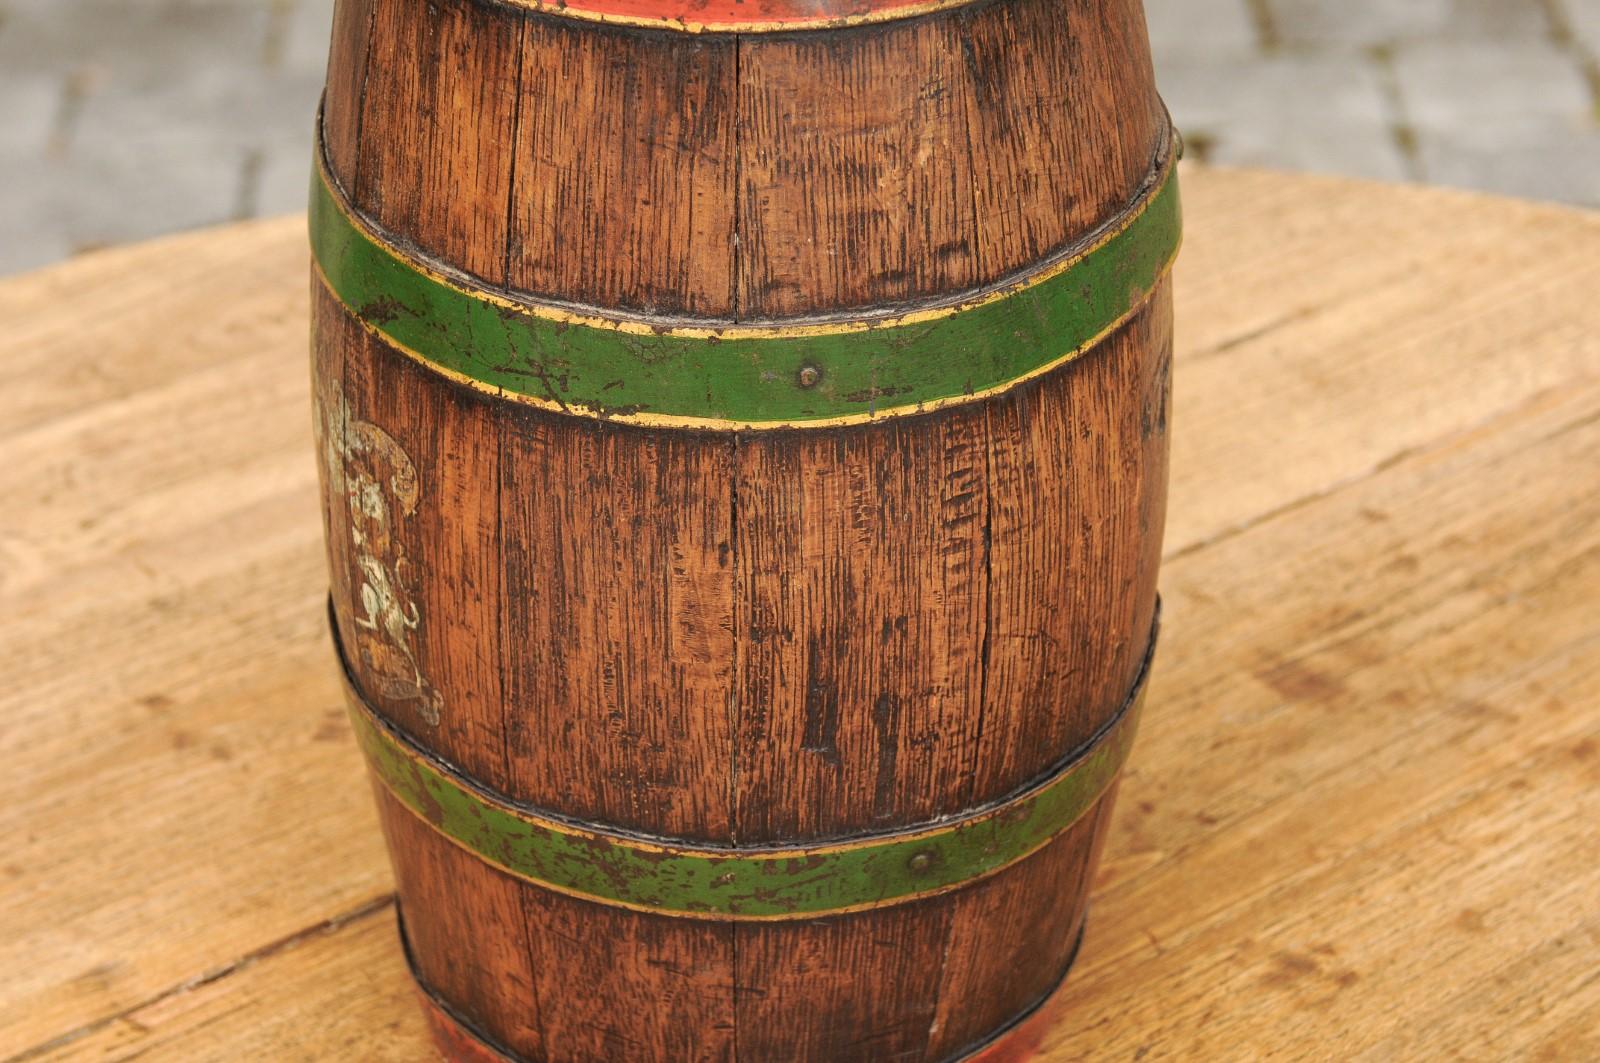 Petite 1900s Rustic English Edwardian Wooden Barrel with Green and Red Accents 5